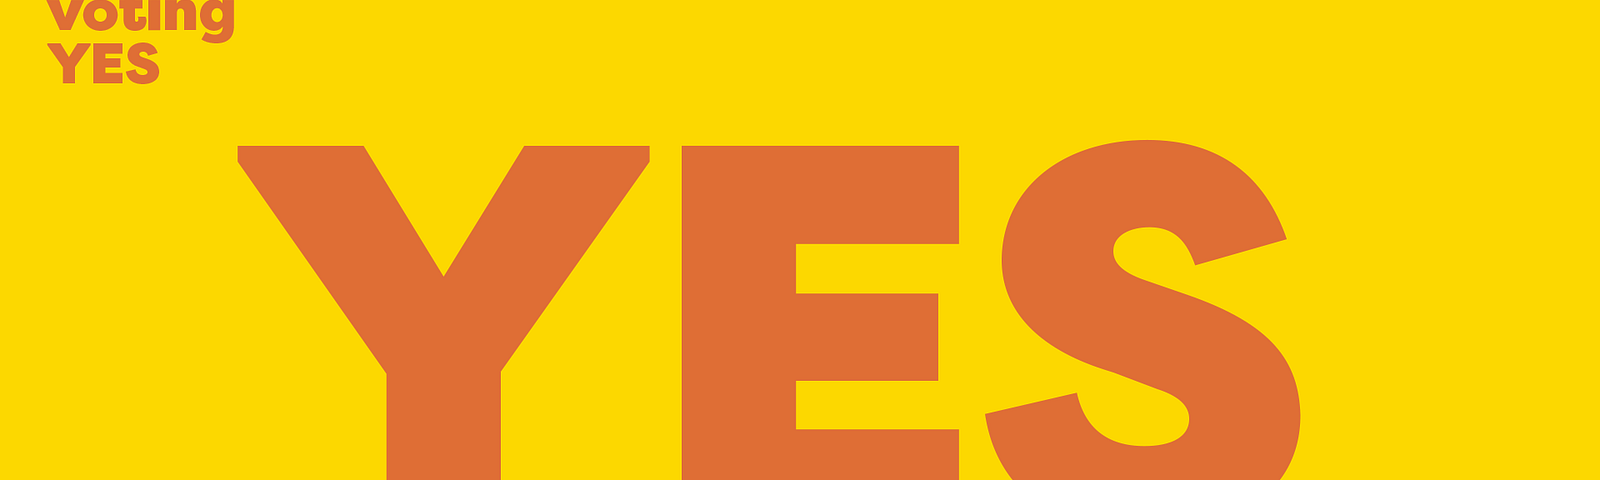 Official Yes campaign graphic with “I’m voting YES” in orange on a yellow background in sans serif font.